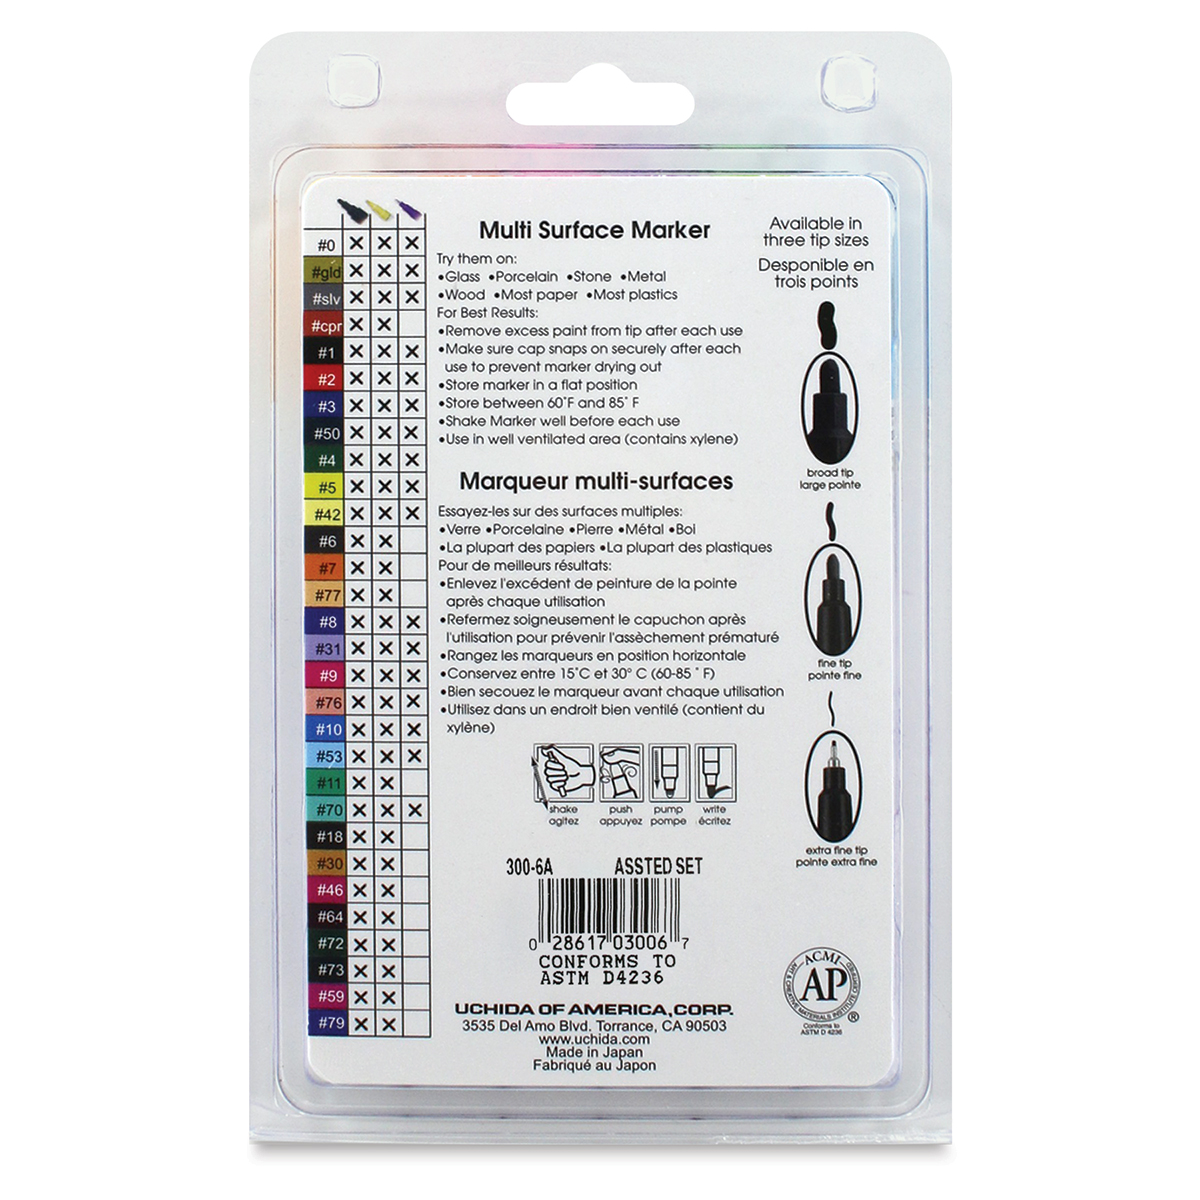 Decocolor Paint Marker - Primary Colors, Broad Tip, Set of 6